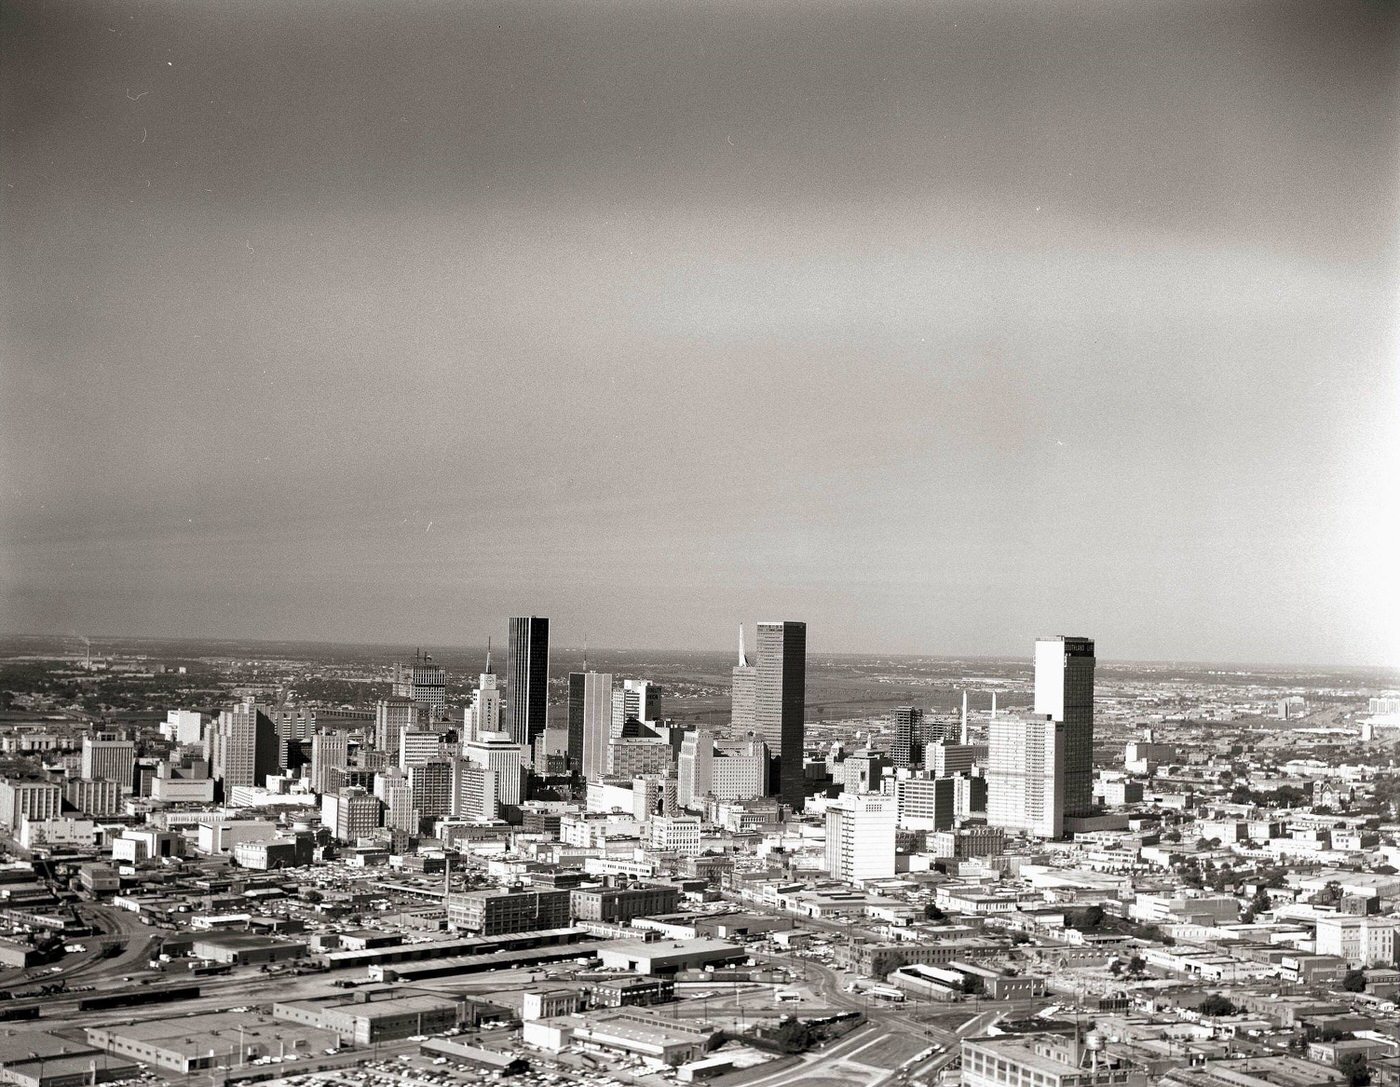 Skyline of dallas, Dallas is ever expanding with industries, as well as the cultural arts such as theater, music, museums and several major universities, , Dallas, 1967